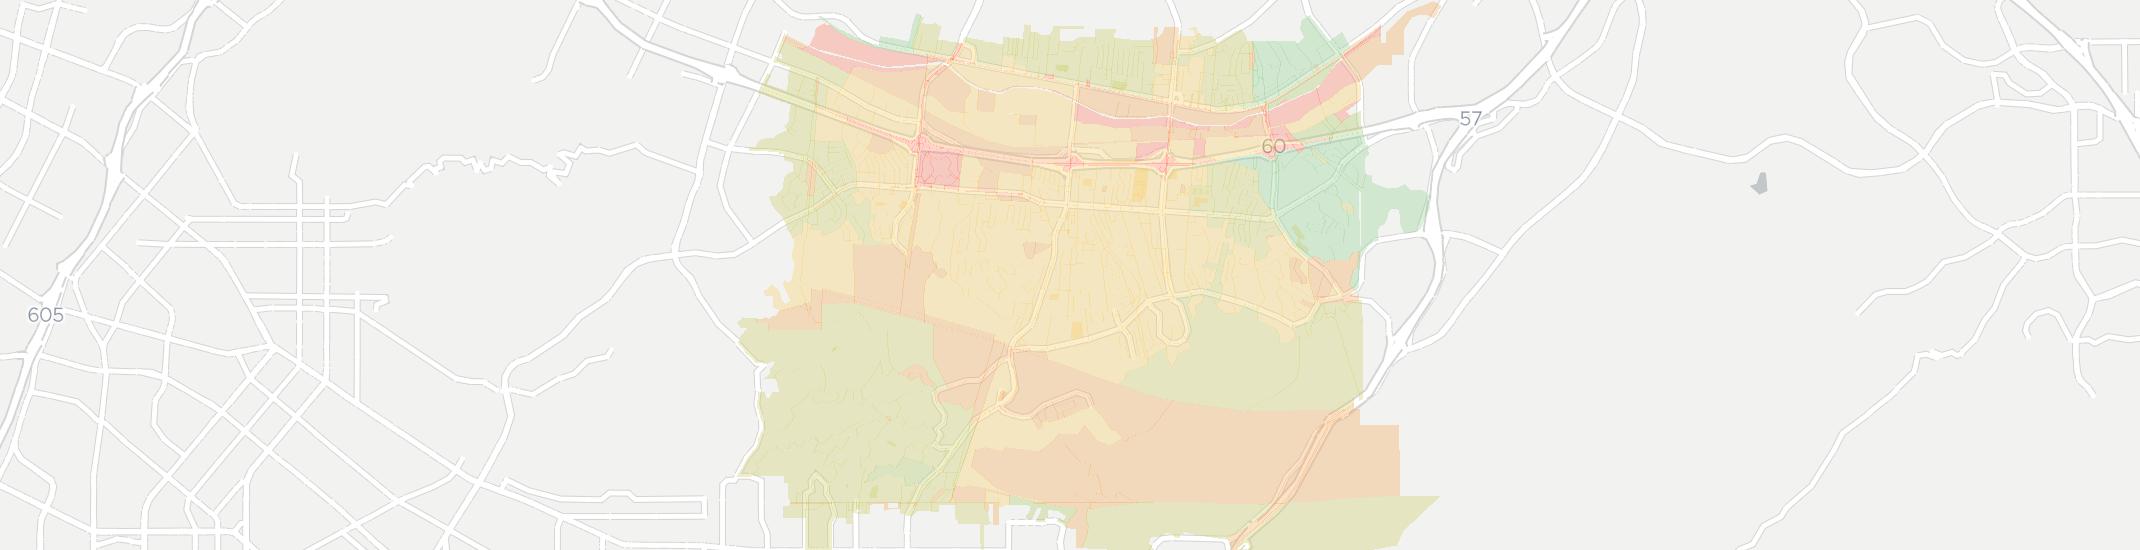 Rowland Heights Internet Competition Map. Click for interactive map